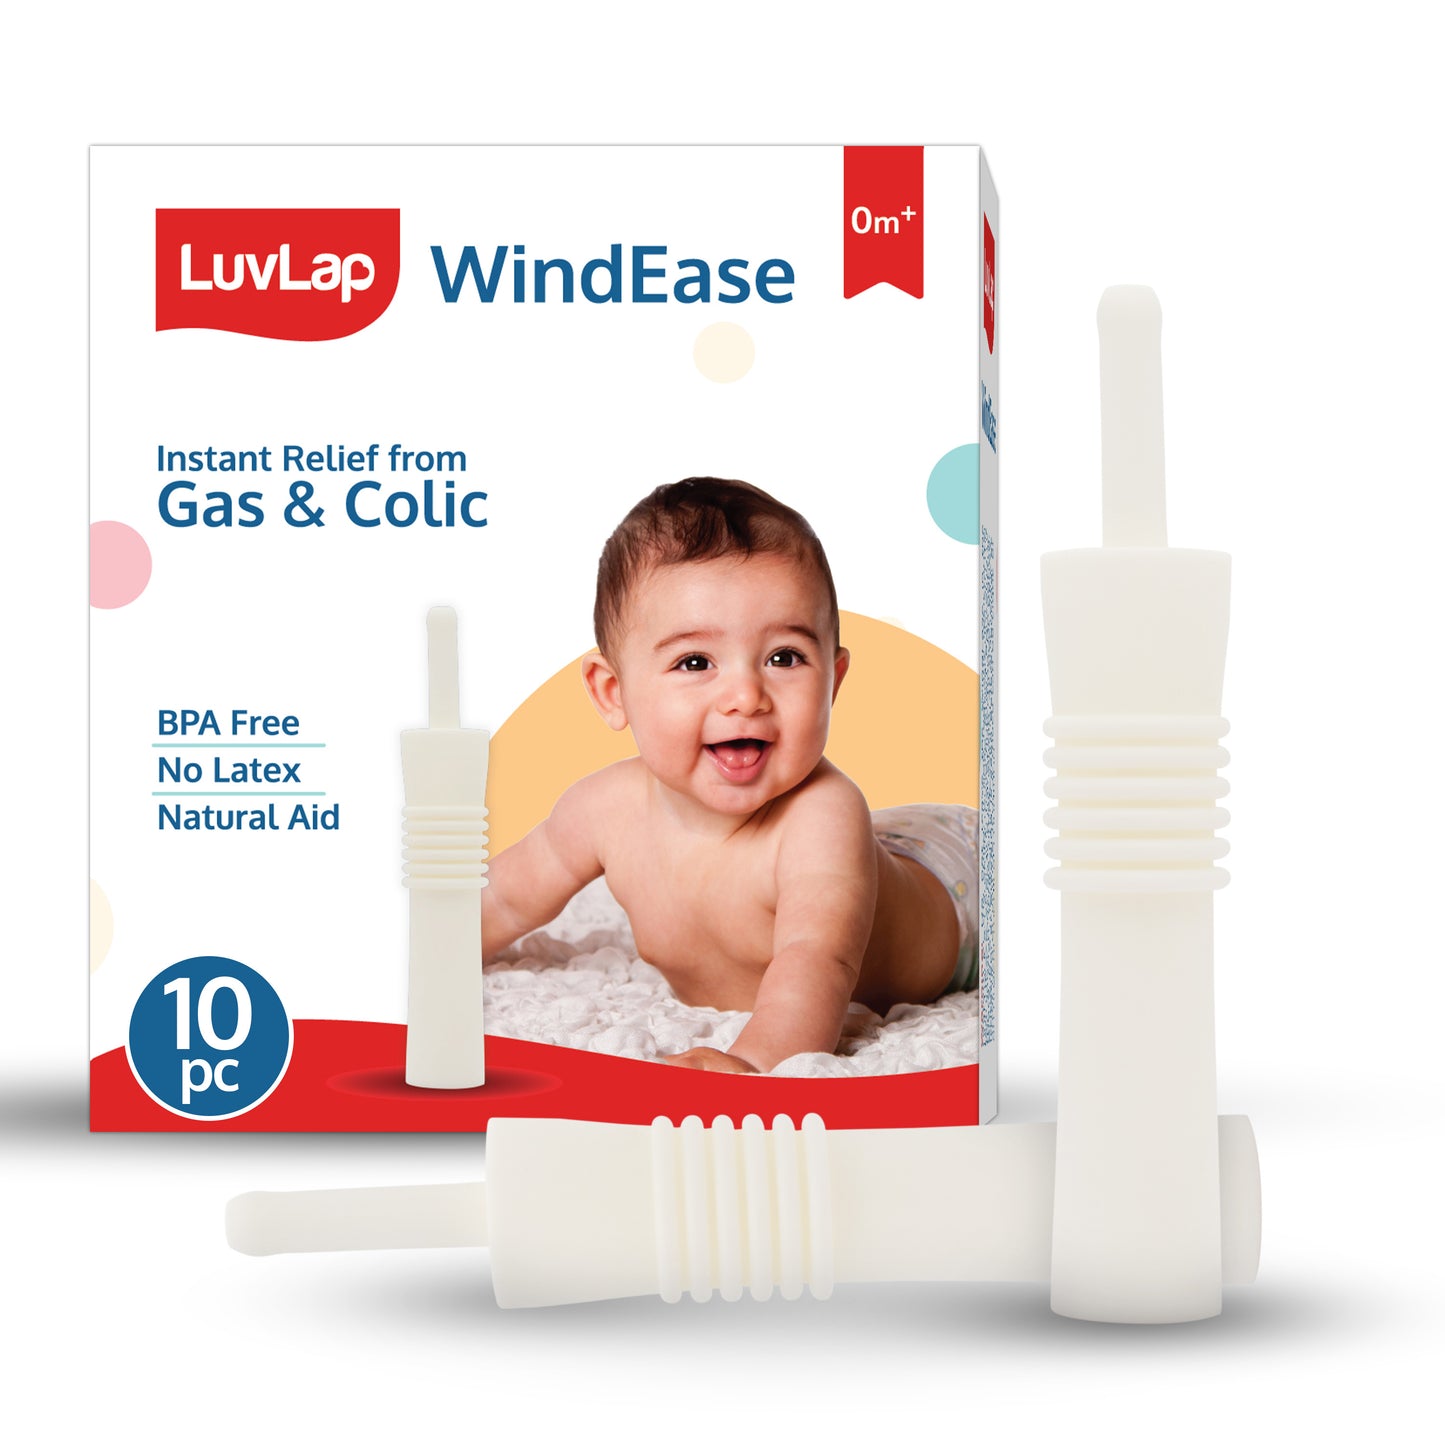 WindEase Colic Reliever for Babies, Instant relief from Gas & Colic, BPA & Latex Free, Natural aid, pack of 10